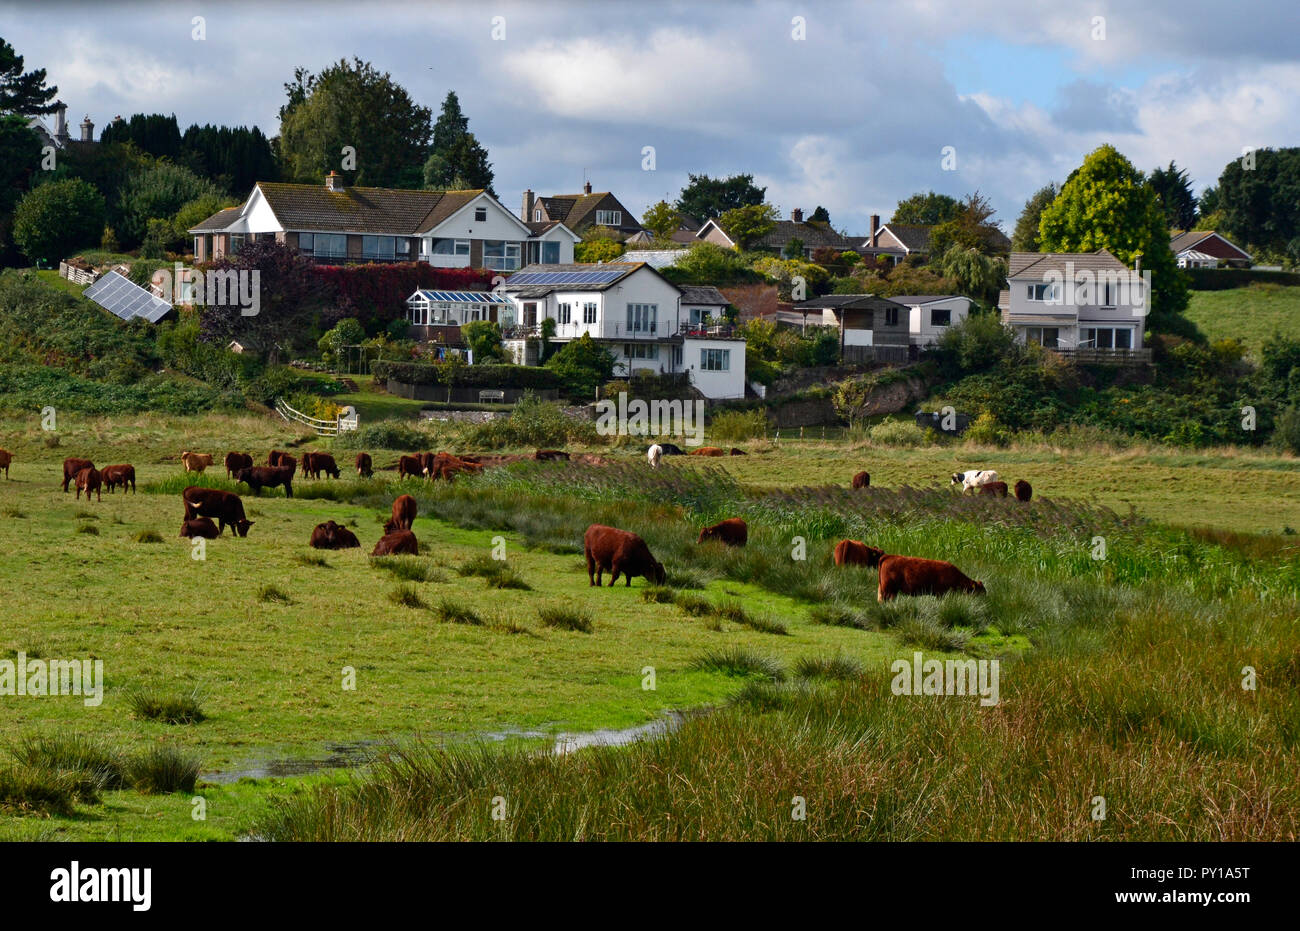 Cattle, stream, and view into the village from RSPB Darts Farm nature walk. Stock Photo